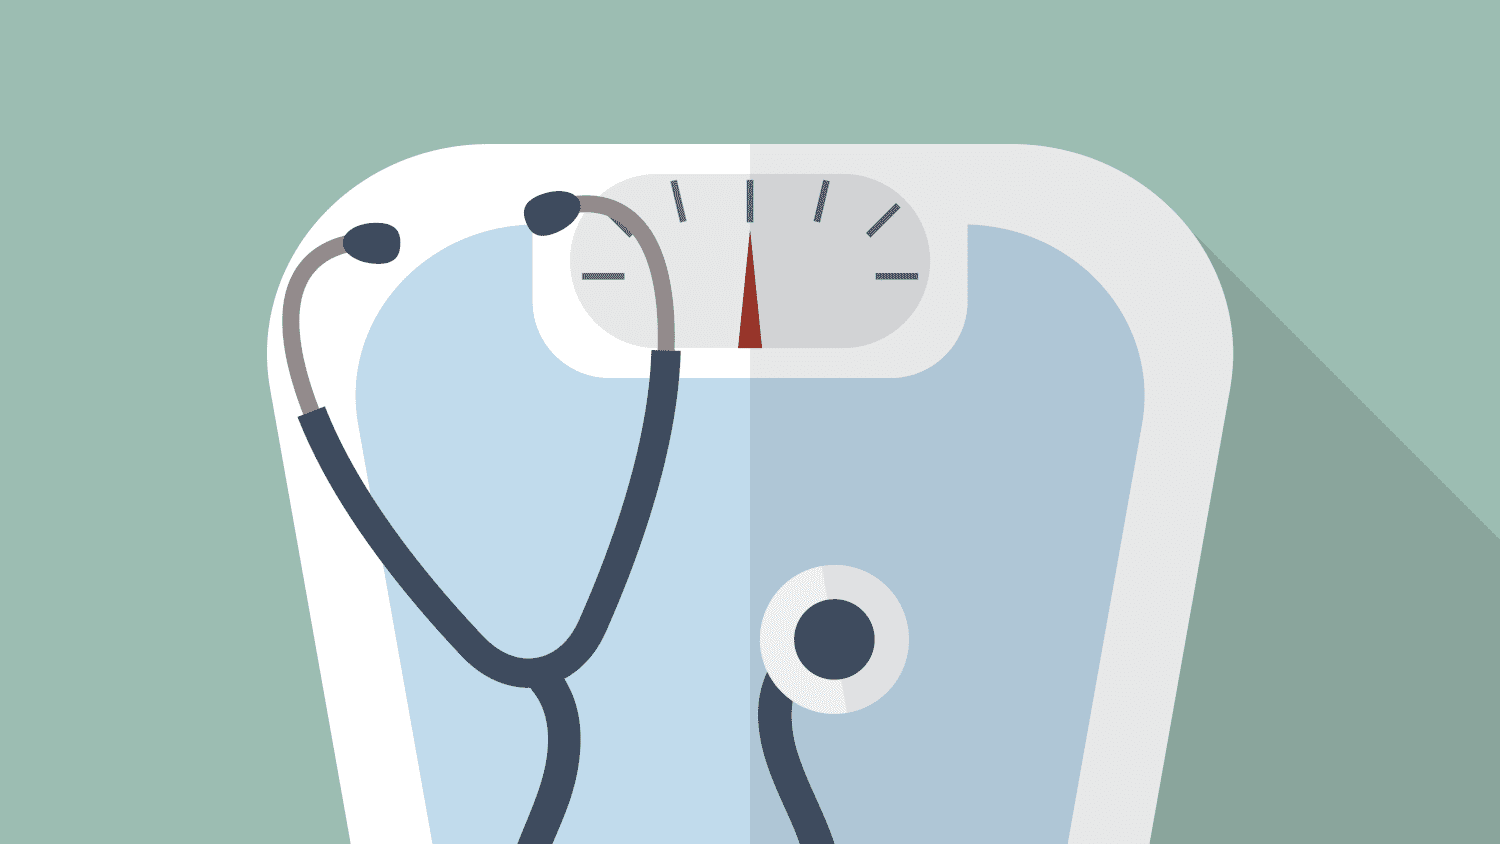 Illustration of a stethoscope and a scale for a weight loss surgery glossary